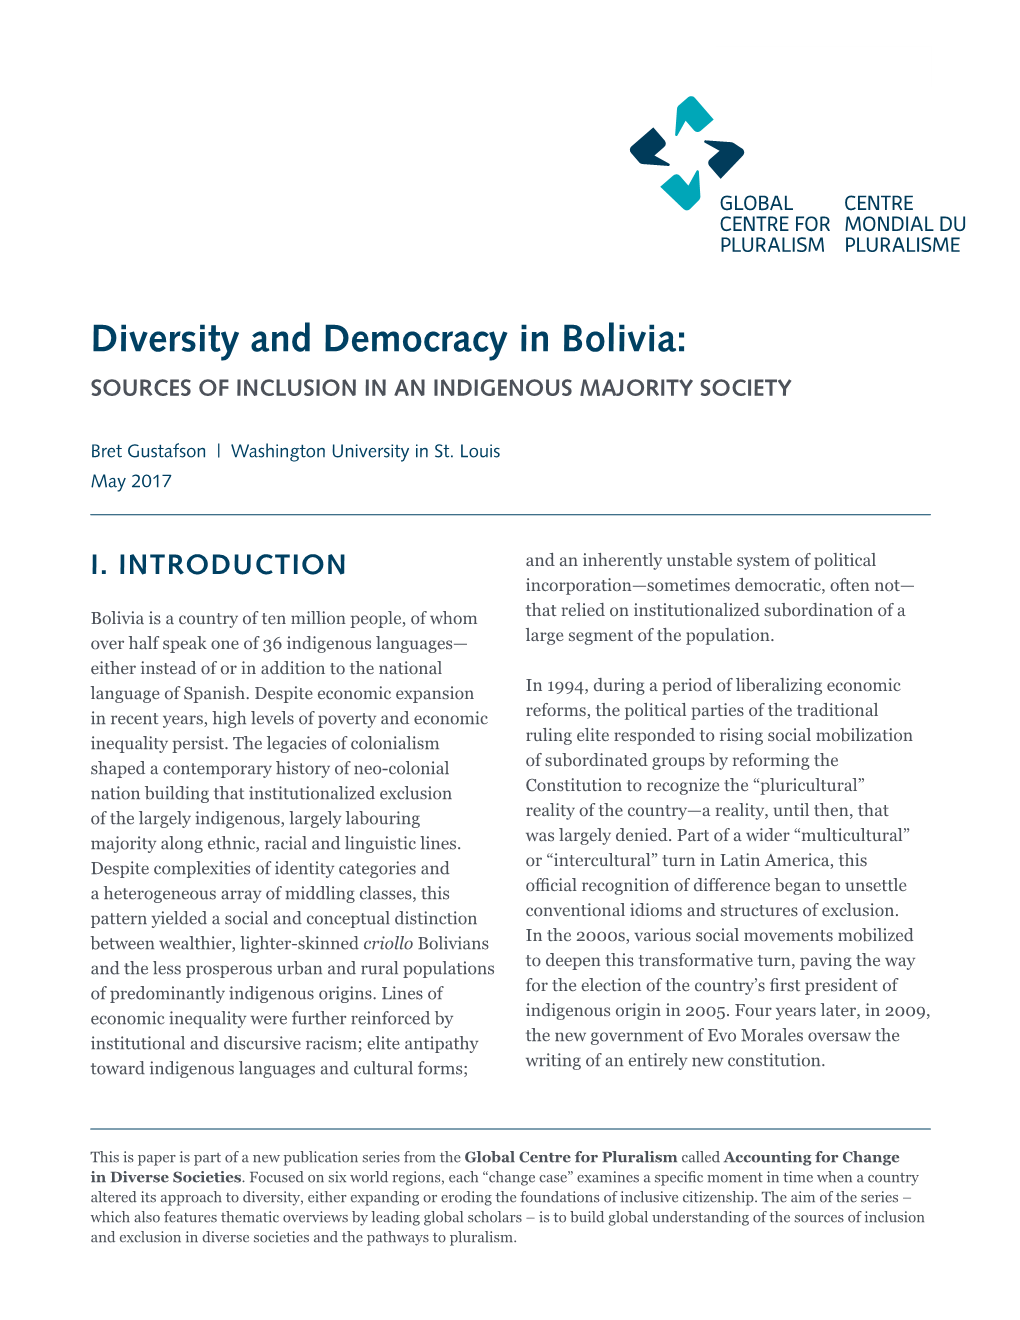 Diversity and Democracy in Bolivia: SOURCES of INCLUSION in an INDIGENOUS MAJORITY SOCIETY